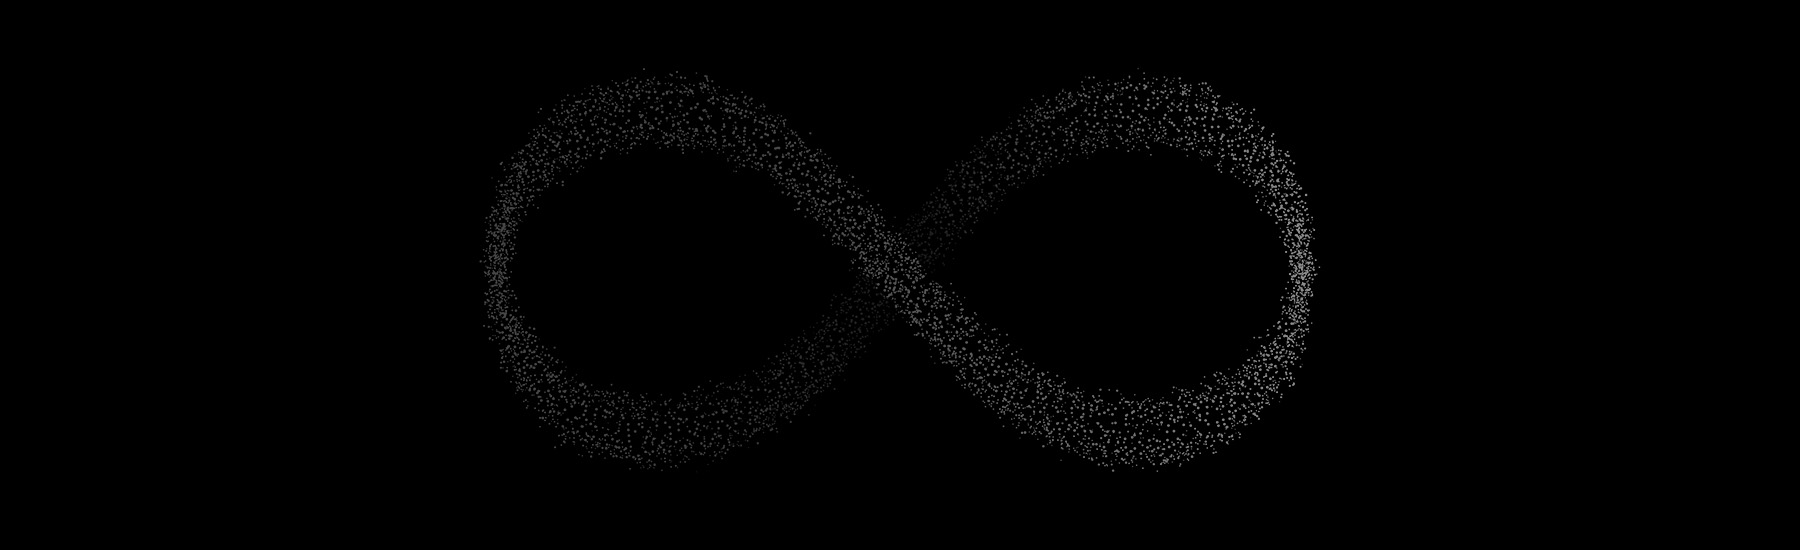 An infinity symbol made out of particles, desktop hero.